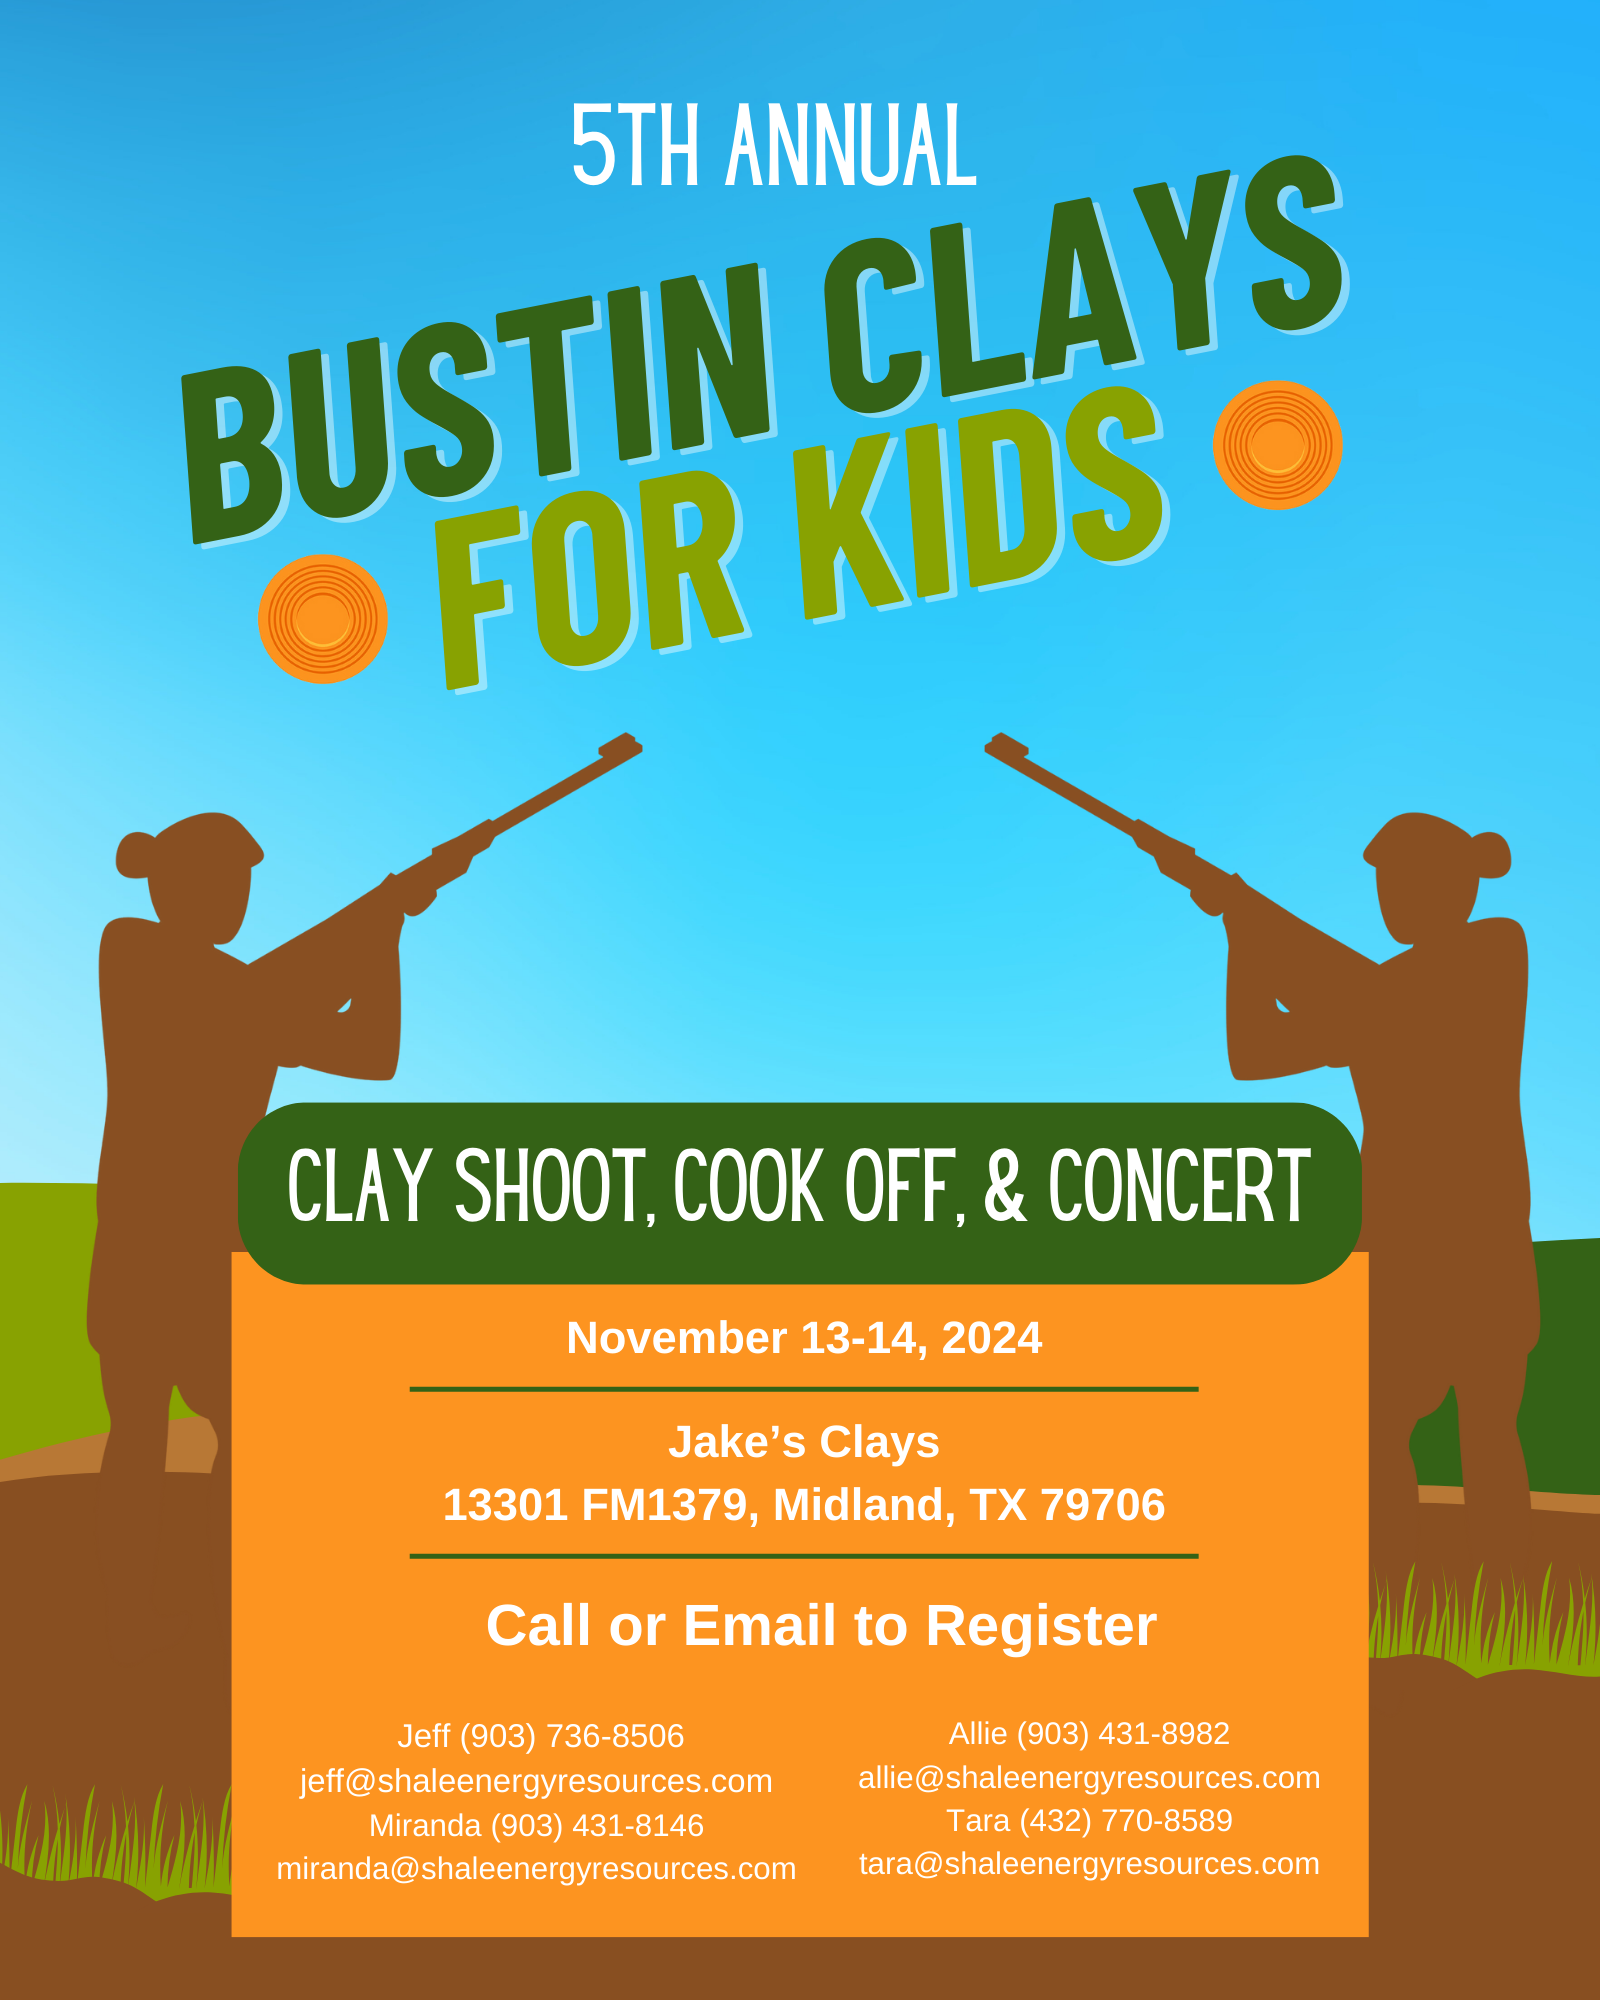 Bustin Clays For Kids